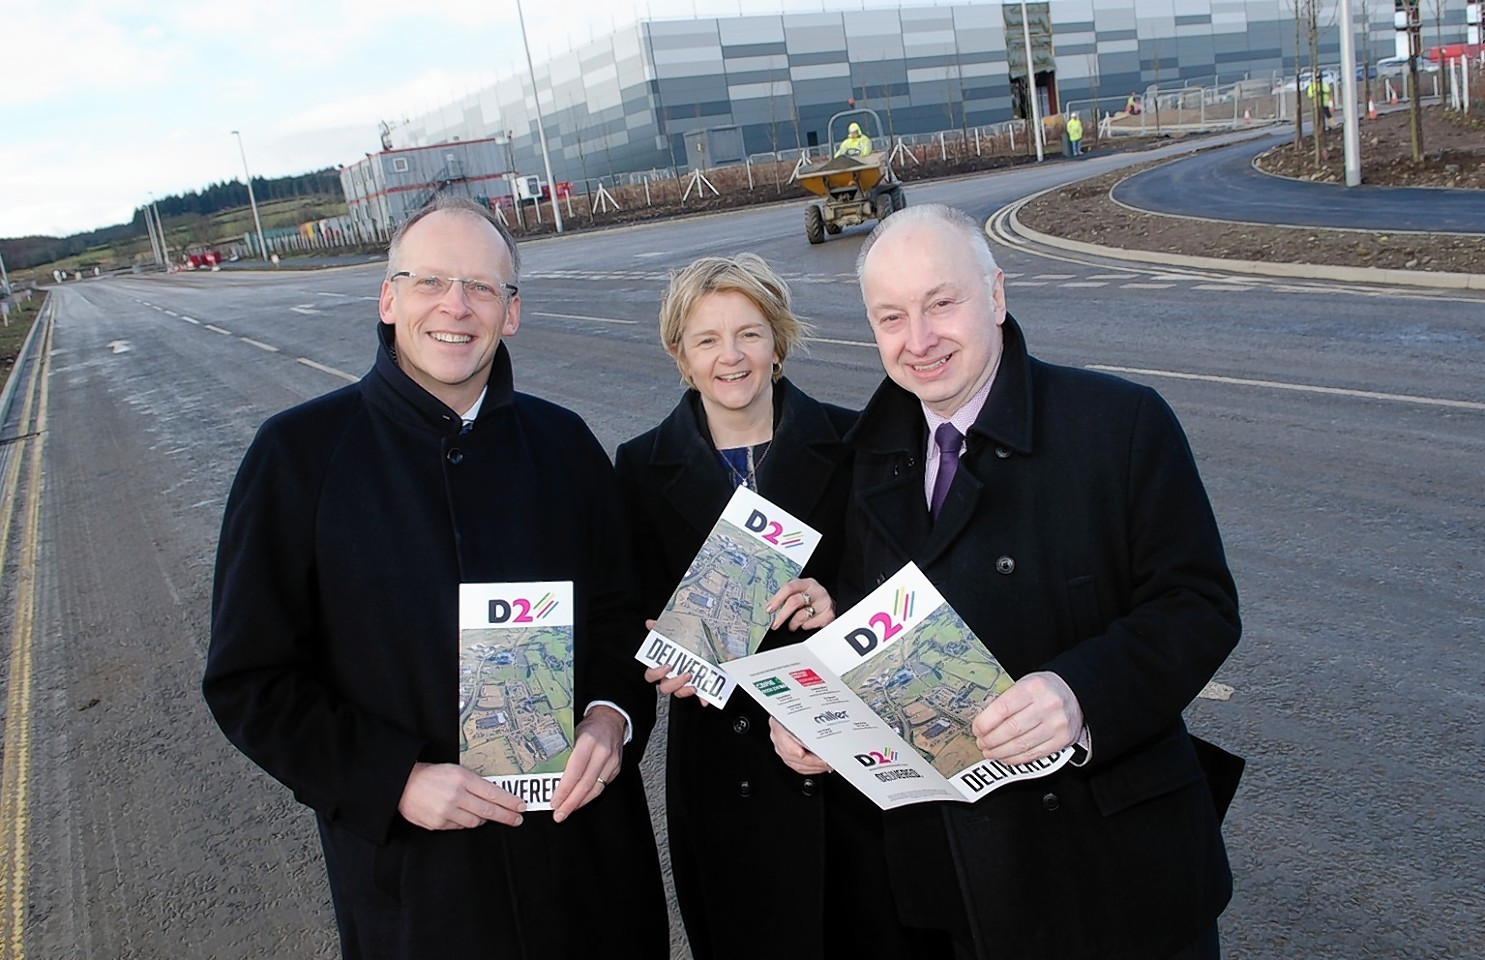  David Milloy, Joint MD of Miller Developments is joined by Jenny Laing, Leader of Aberdeen City Council, and Lord Provost of Aberdeen, George Adam, to officially declare D2 Business Park open for business.